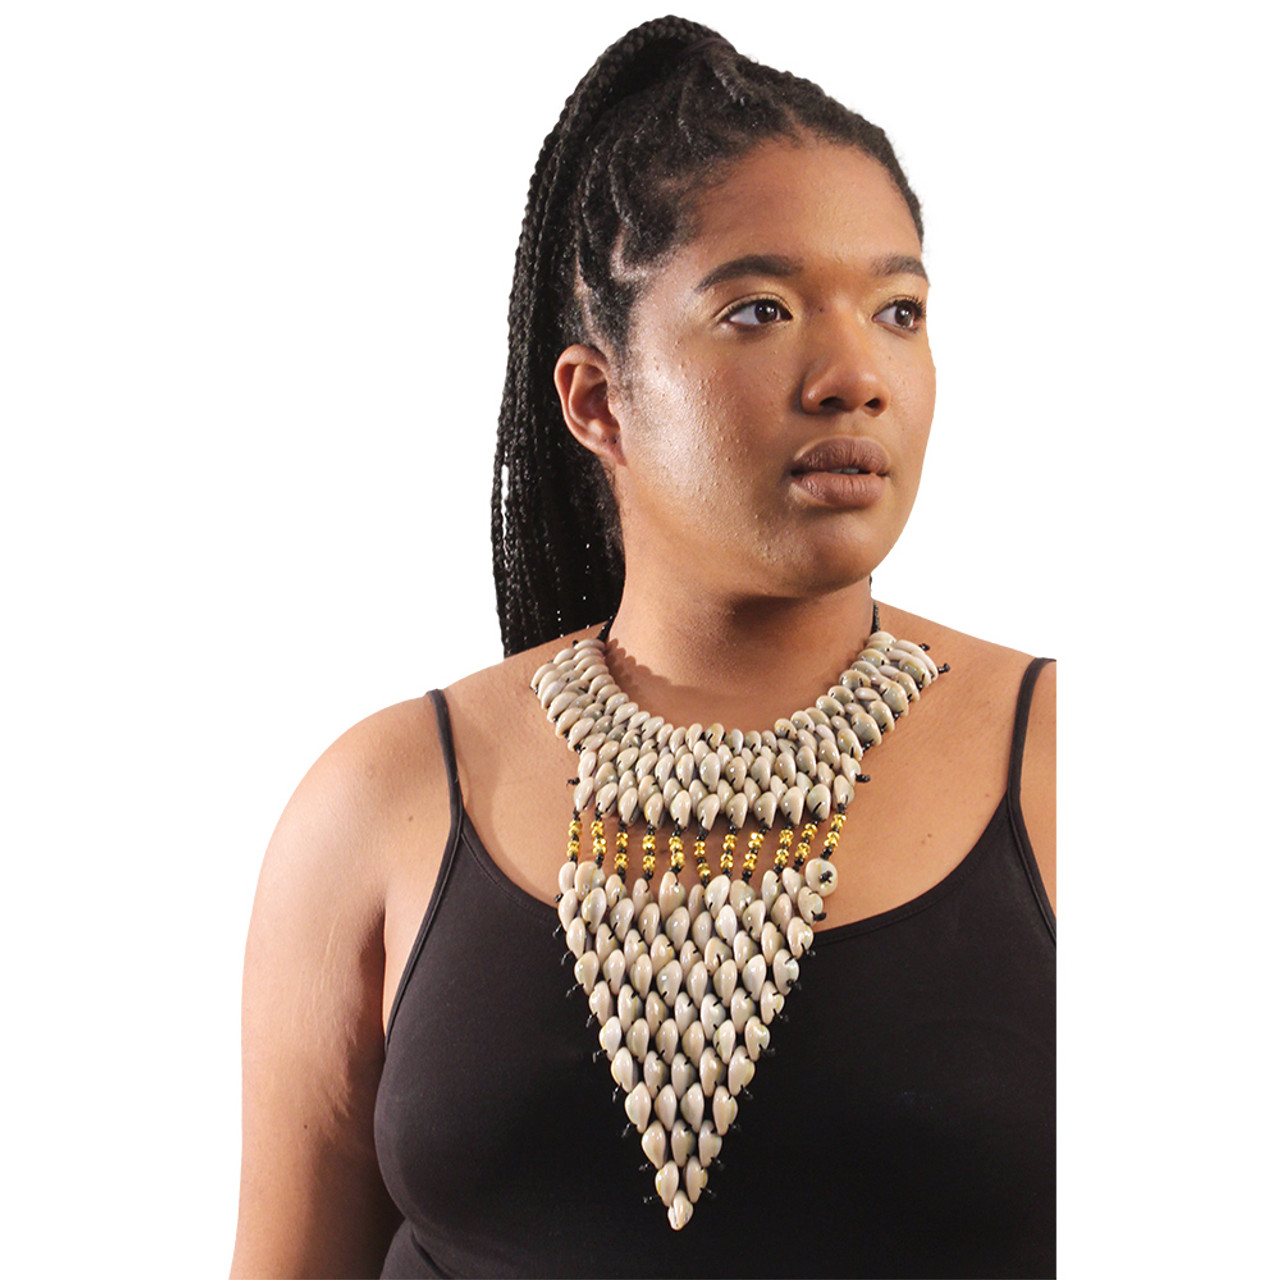 African Collar Vintage Statement Choker Necklace Women Gold Leather Collar  Maxi Necklace African Jewelry Adjustable Big#0304G30 From 21,8 € | DHgate